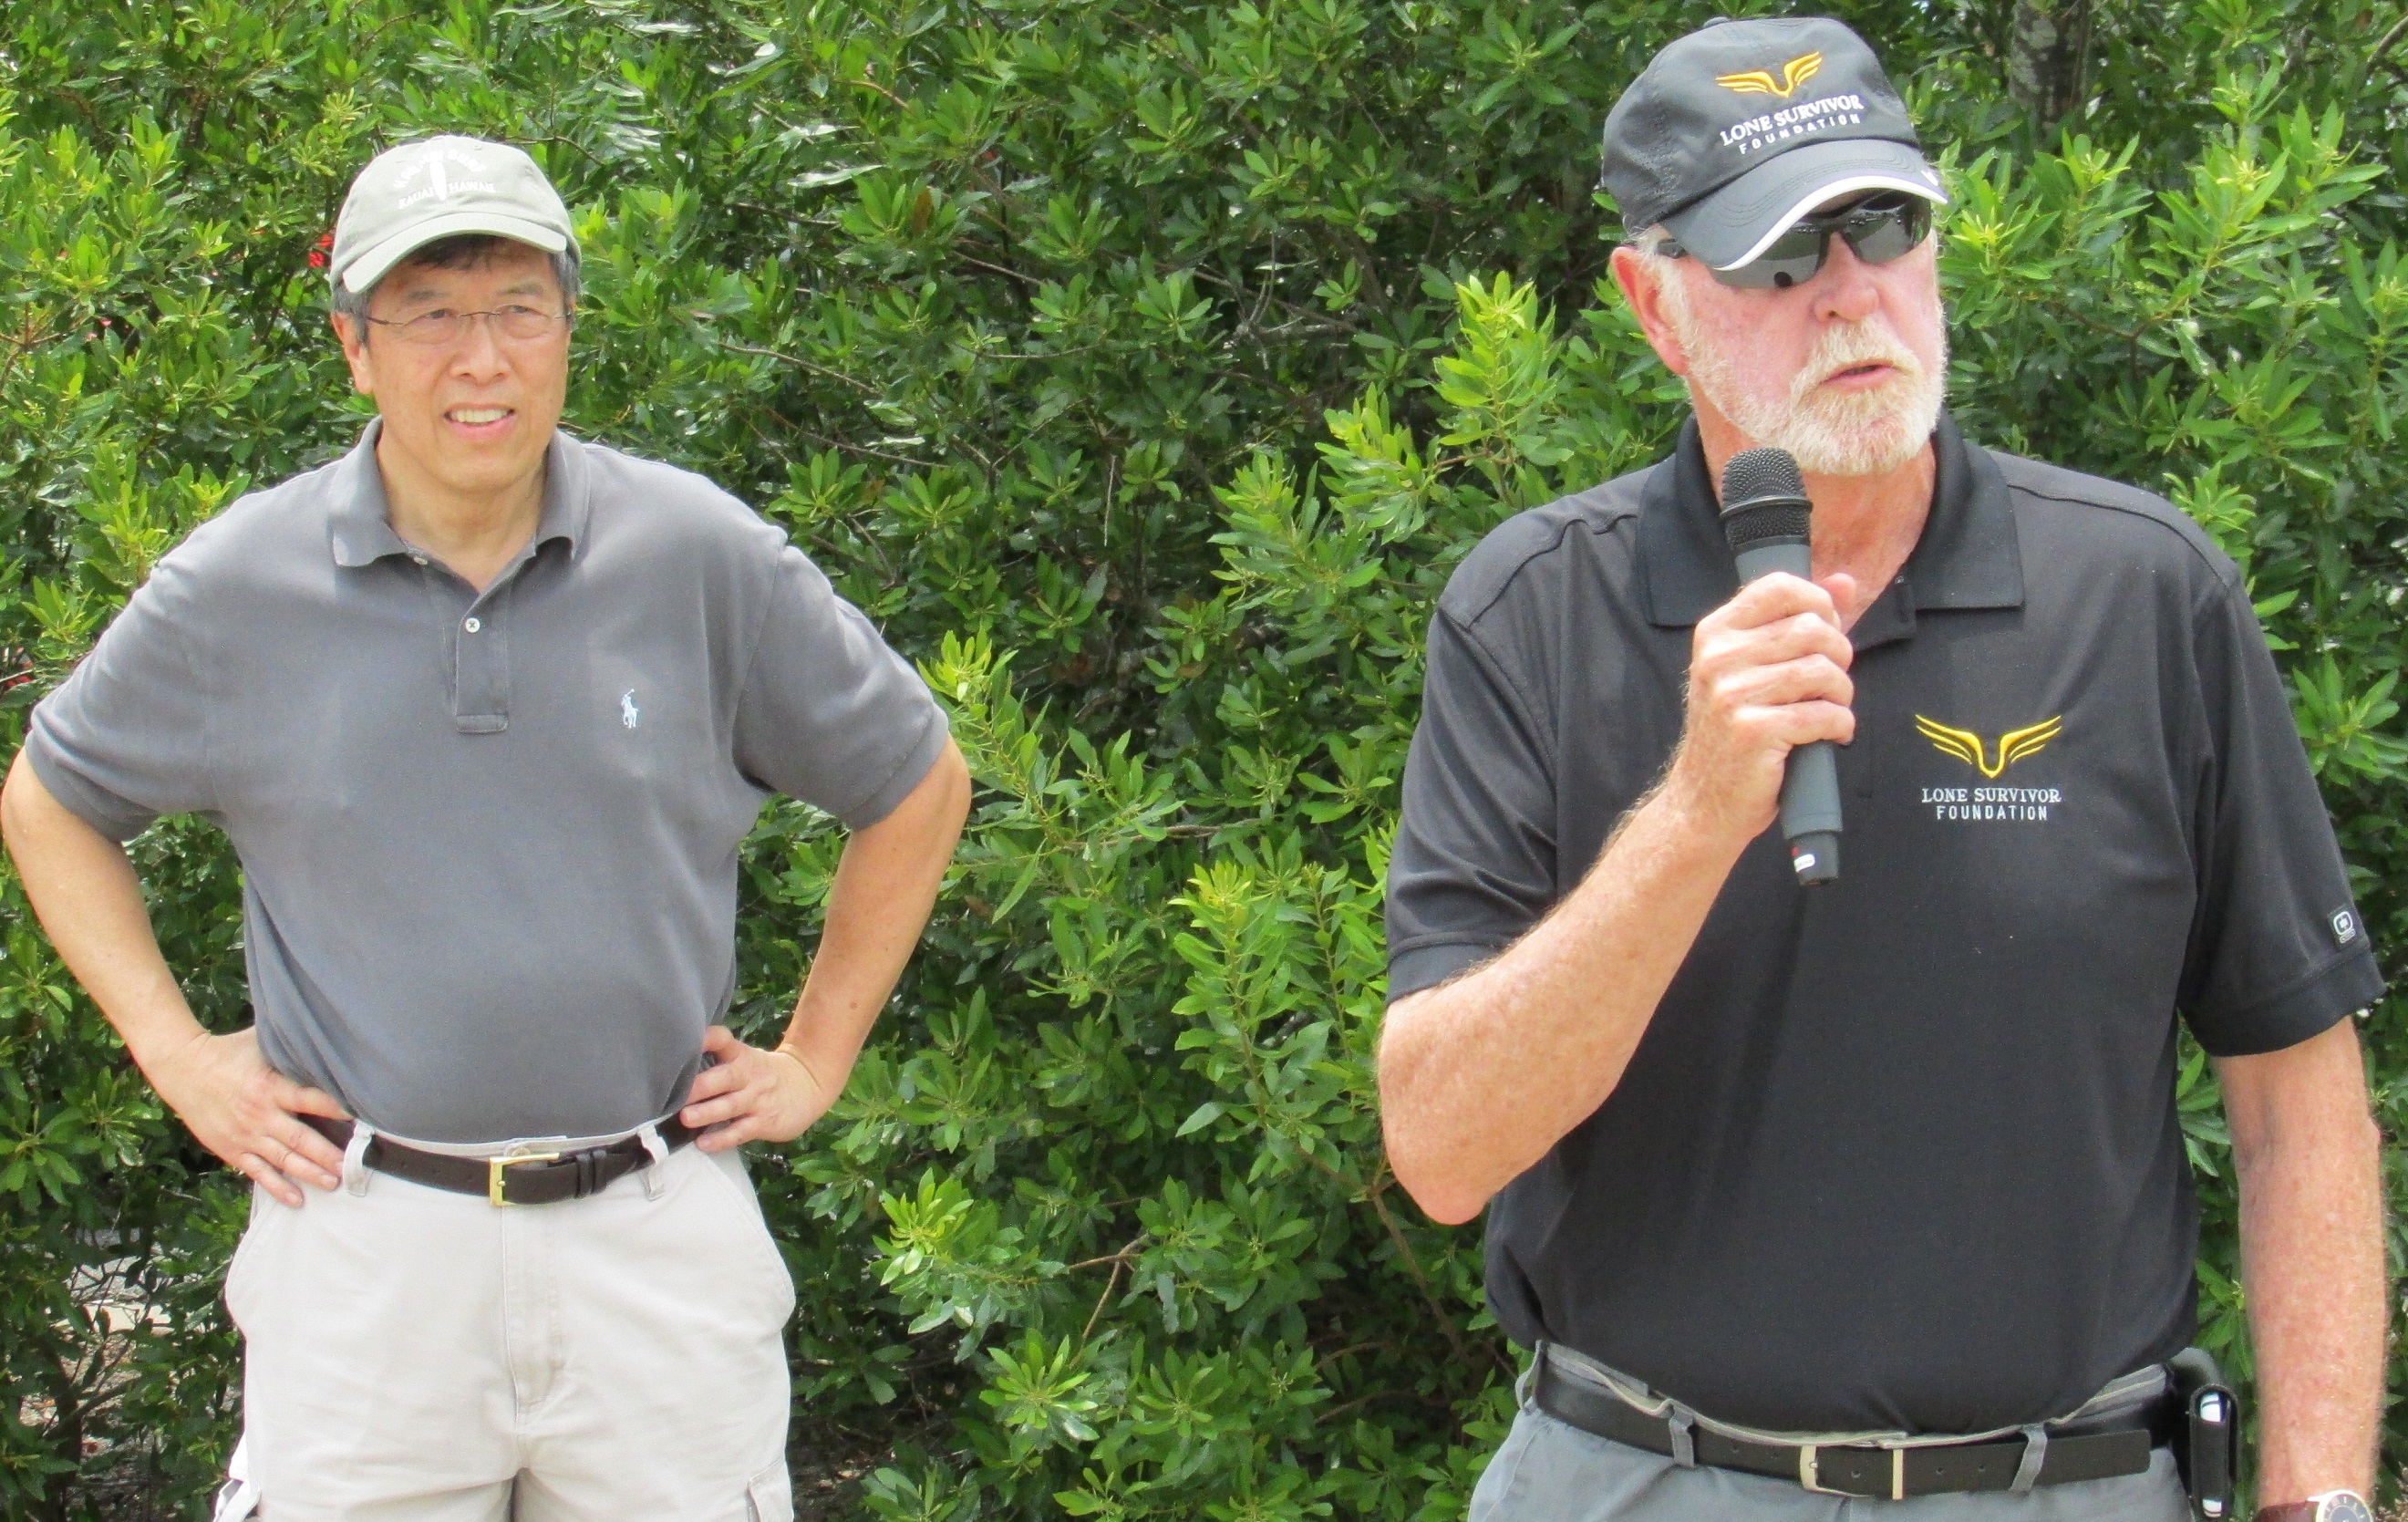 (L-R) Dr. Jimmy Lee, Vice-Chairman of the Board and Chief Operating Officer at North Cypress Medical Center accompanies Terry Jung, Executive Director of the Lone Survivor Foundation, in giving thanks